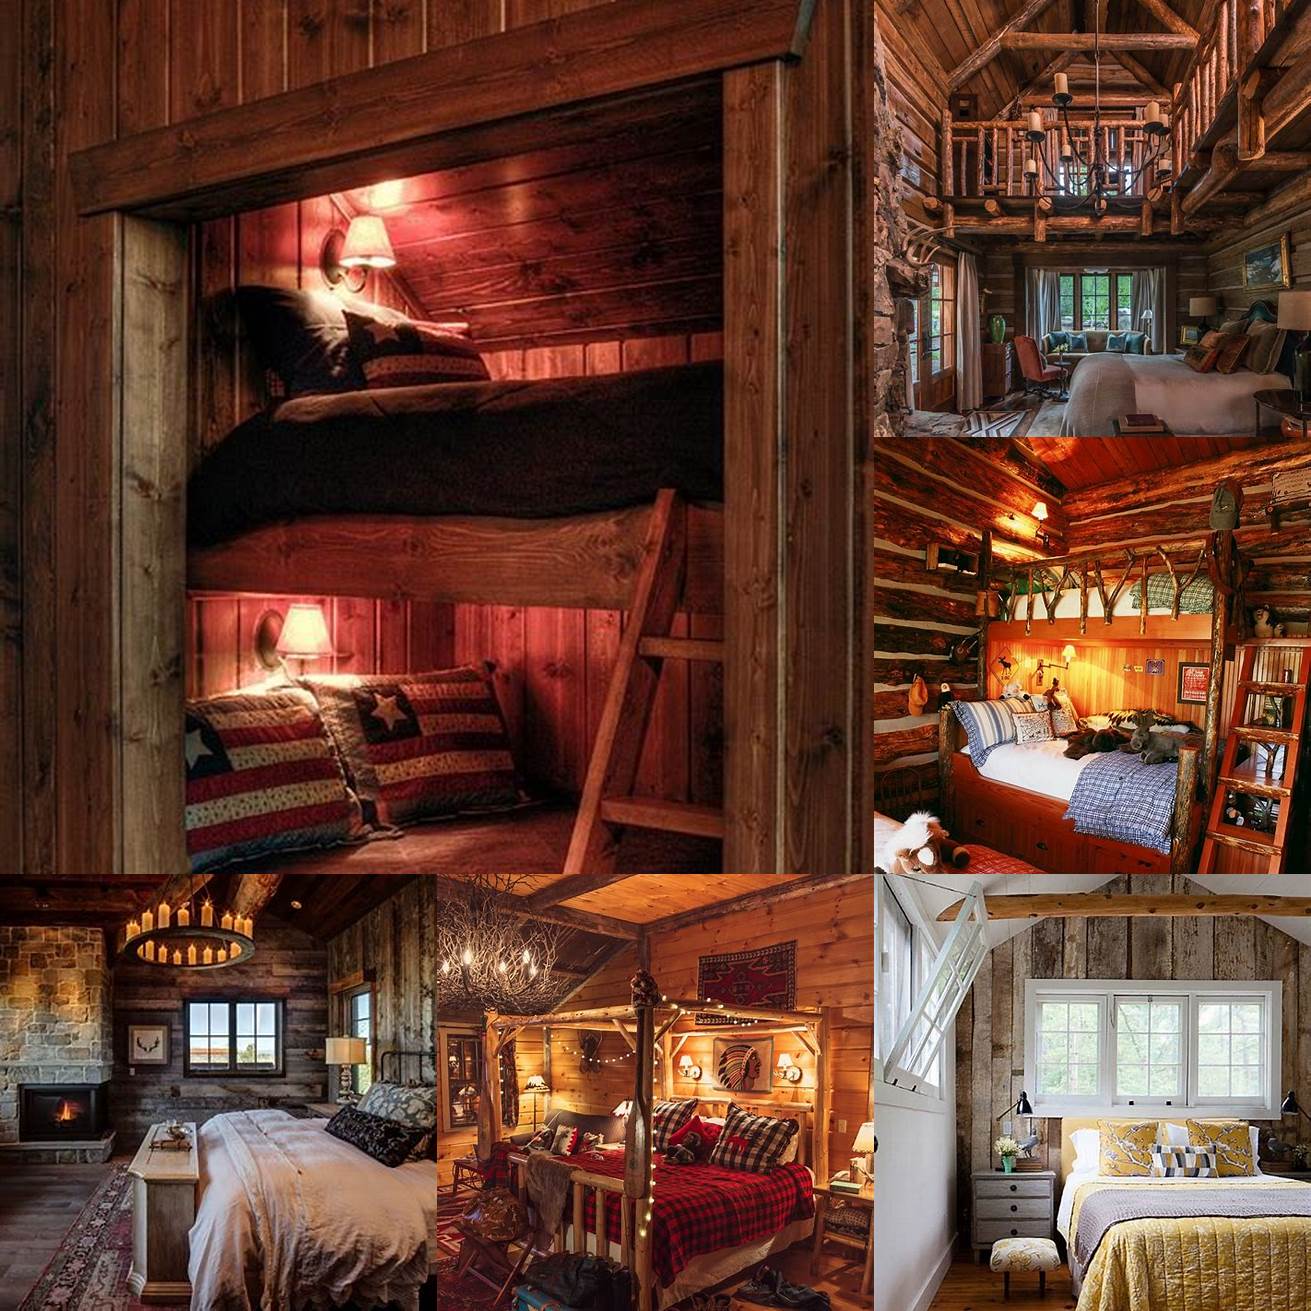 A cozy rustic hideaway bed in a cabin or a cottage